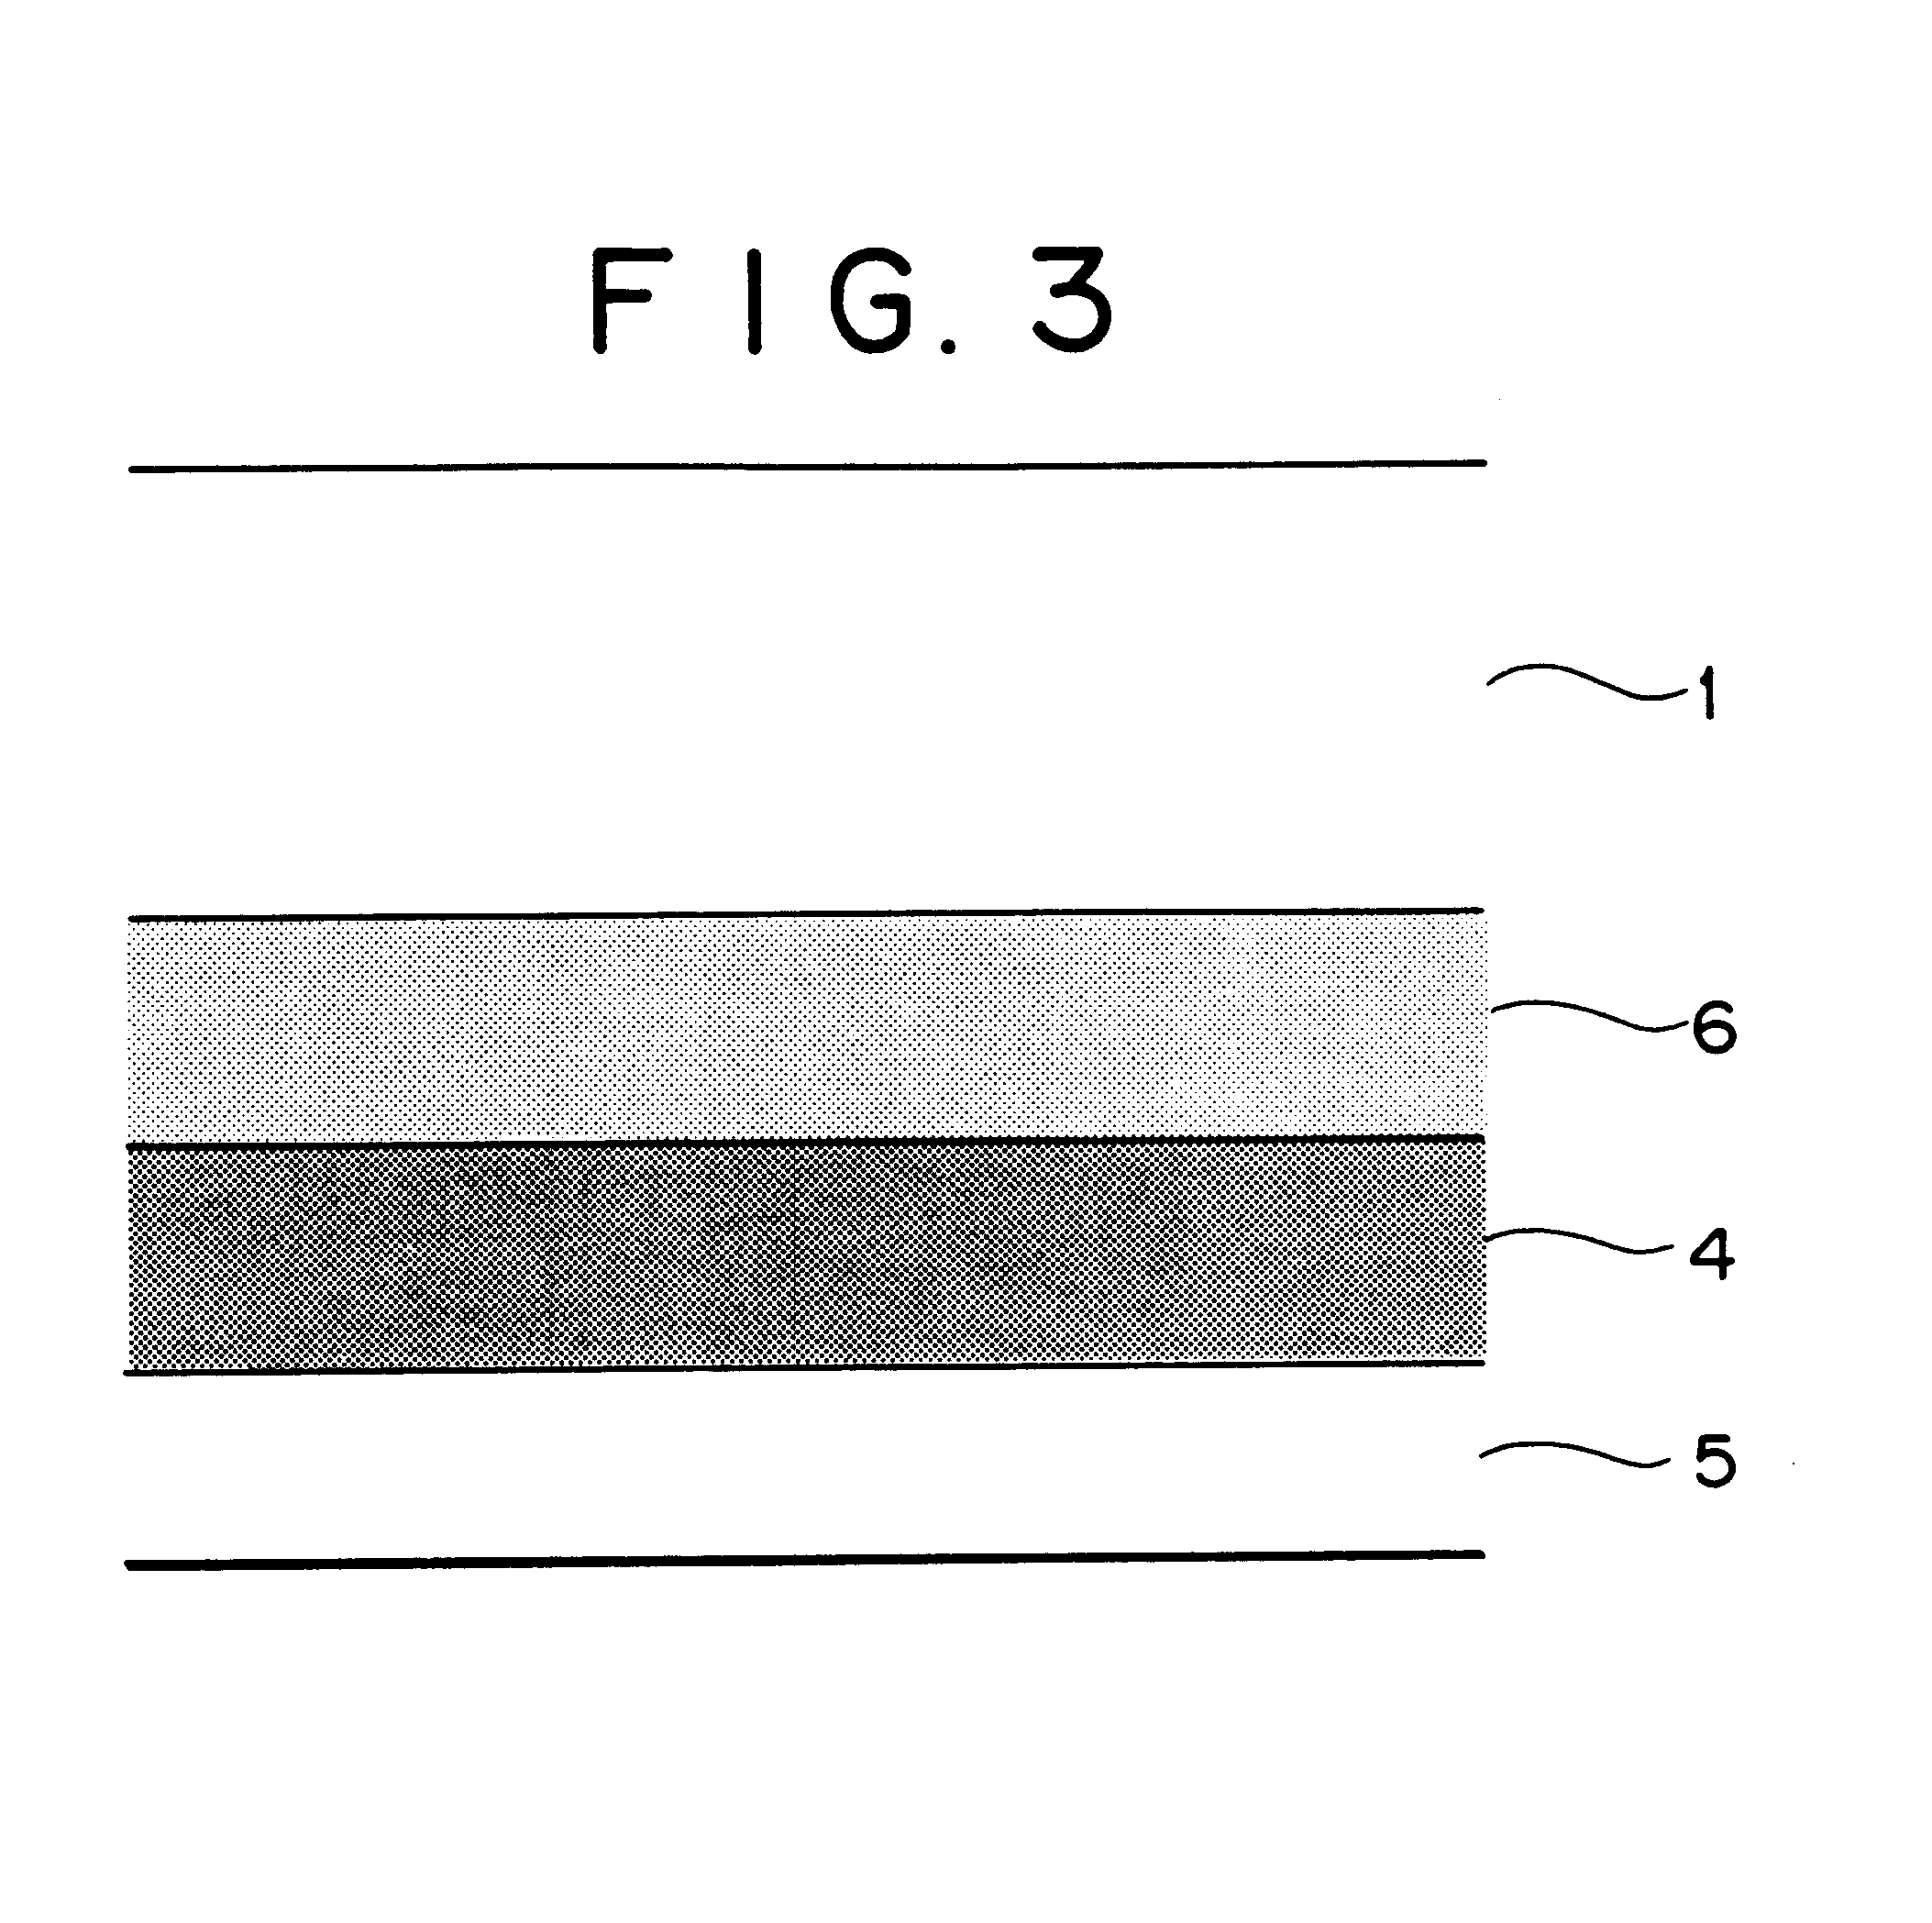 Reflection layer or semi-transparent reflection layer for use in optical information recording media, optical information recording media and sputtering target for use in the optical information recording media